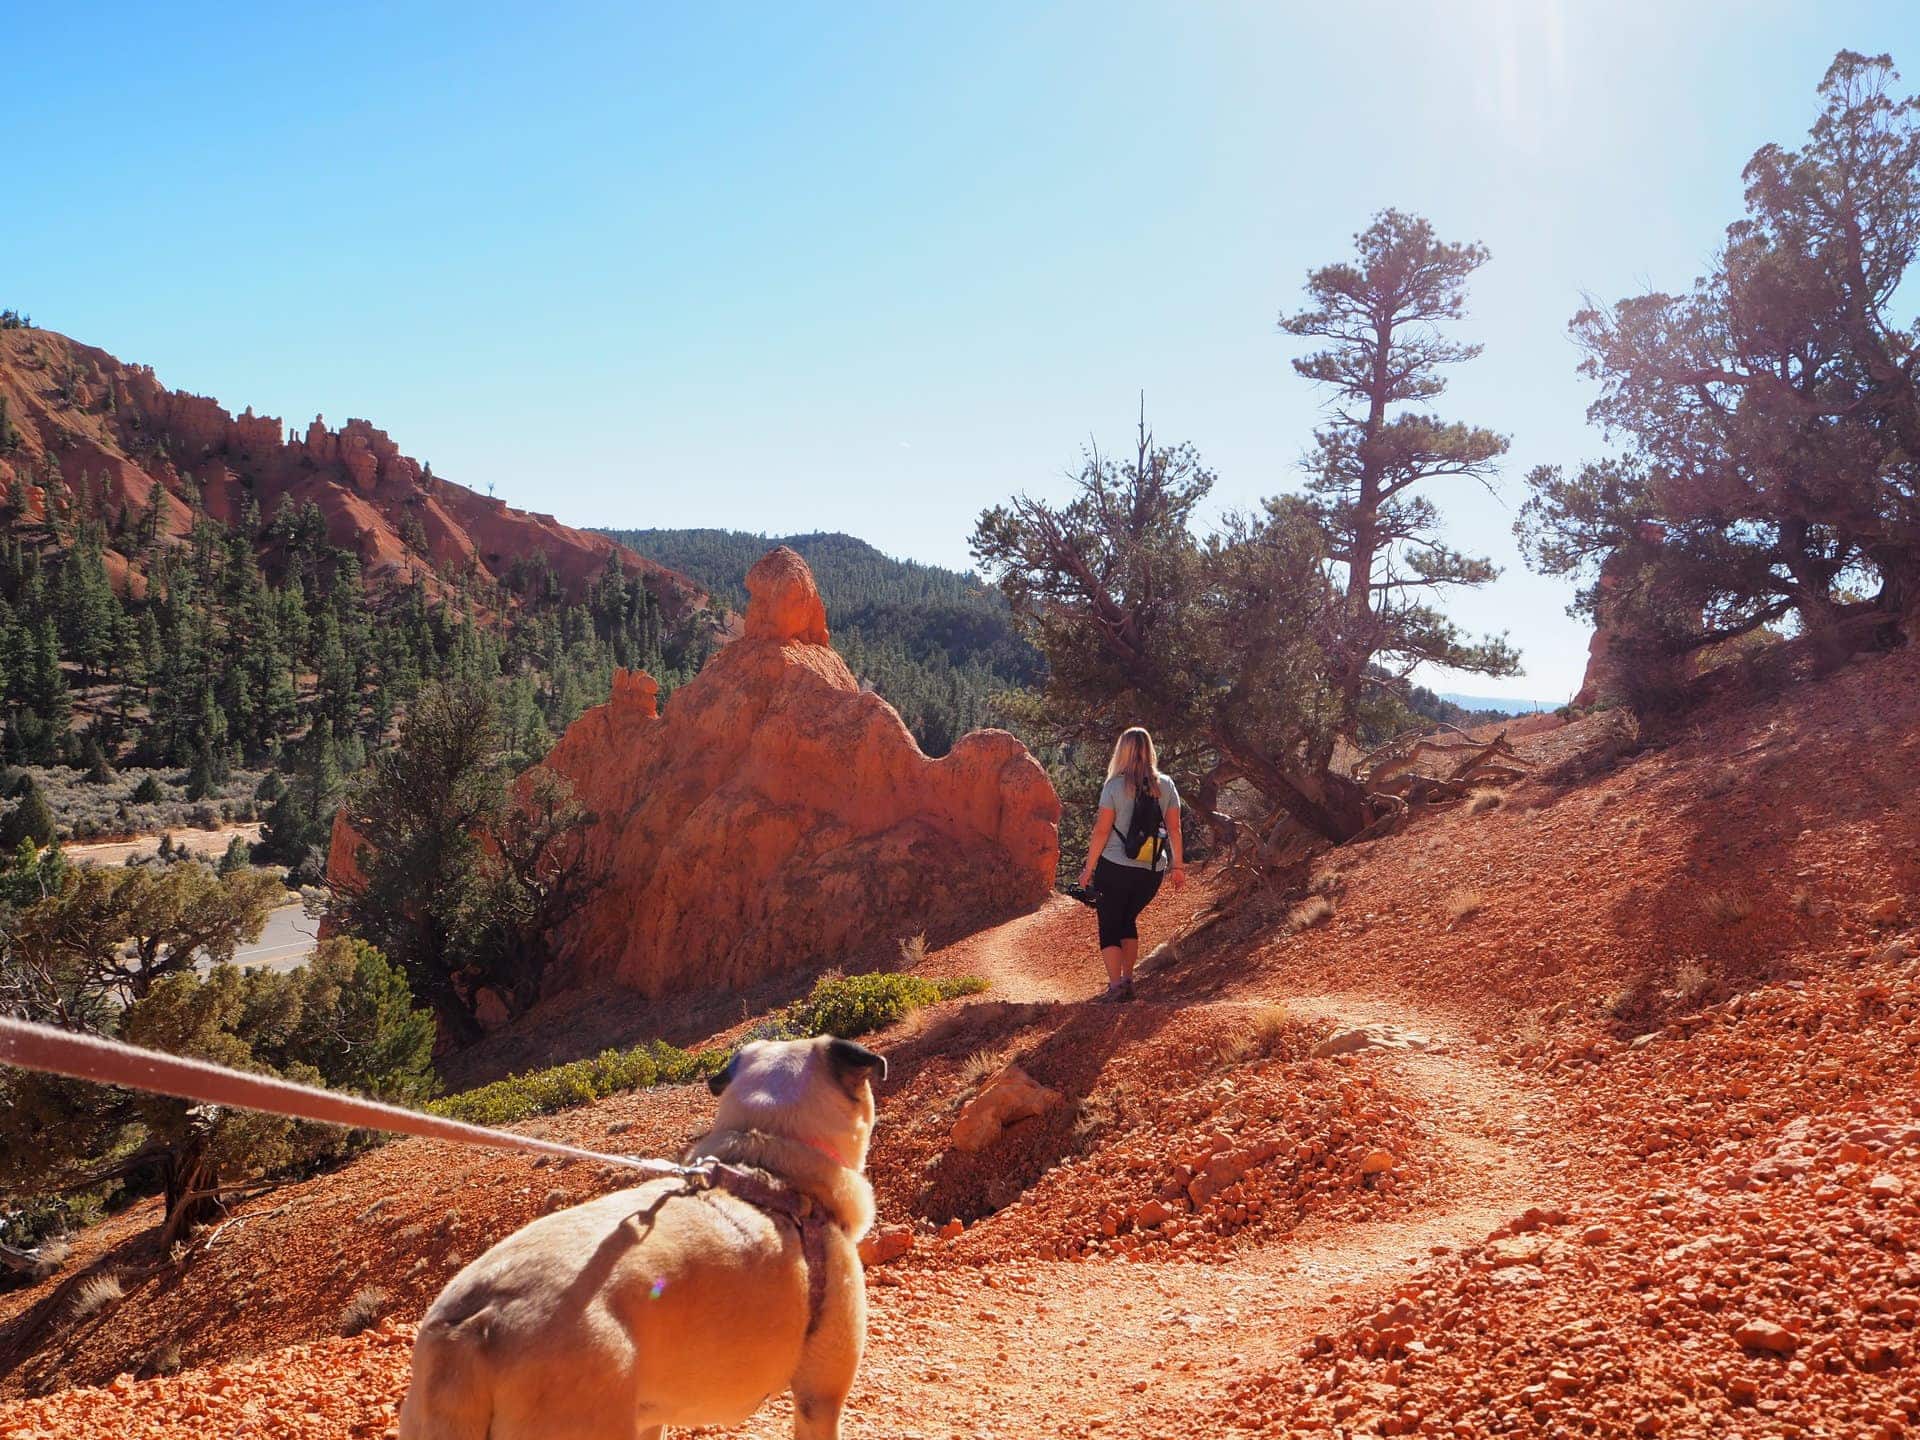 Lexi watching Lindsey while hiking at Red Canyon